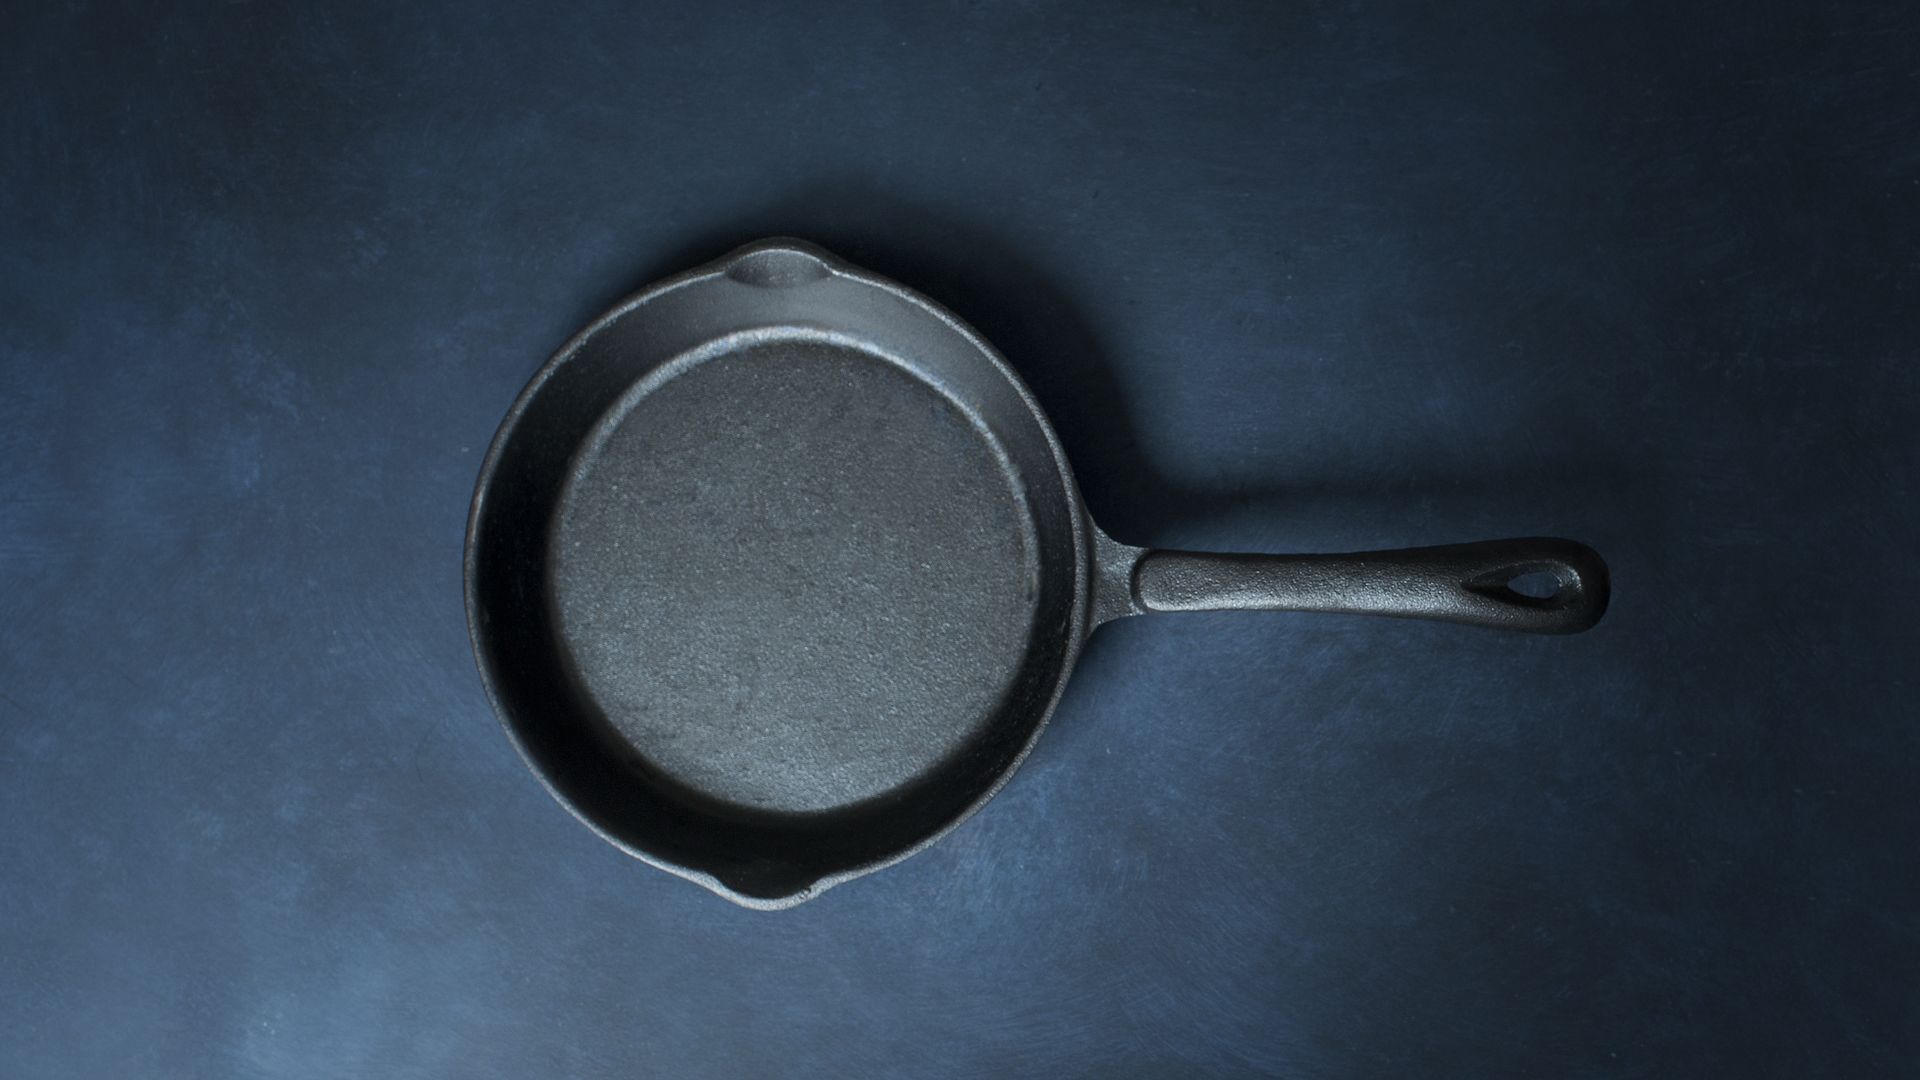 stock photo of a skillet against a blue background